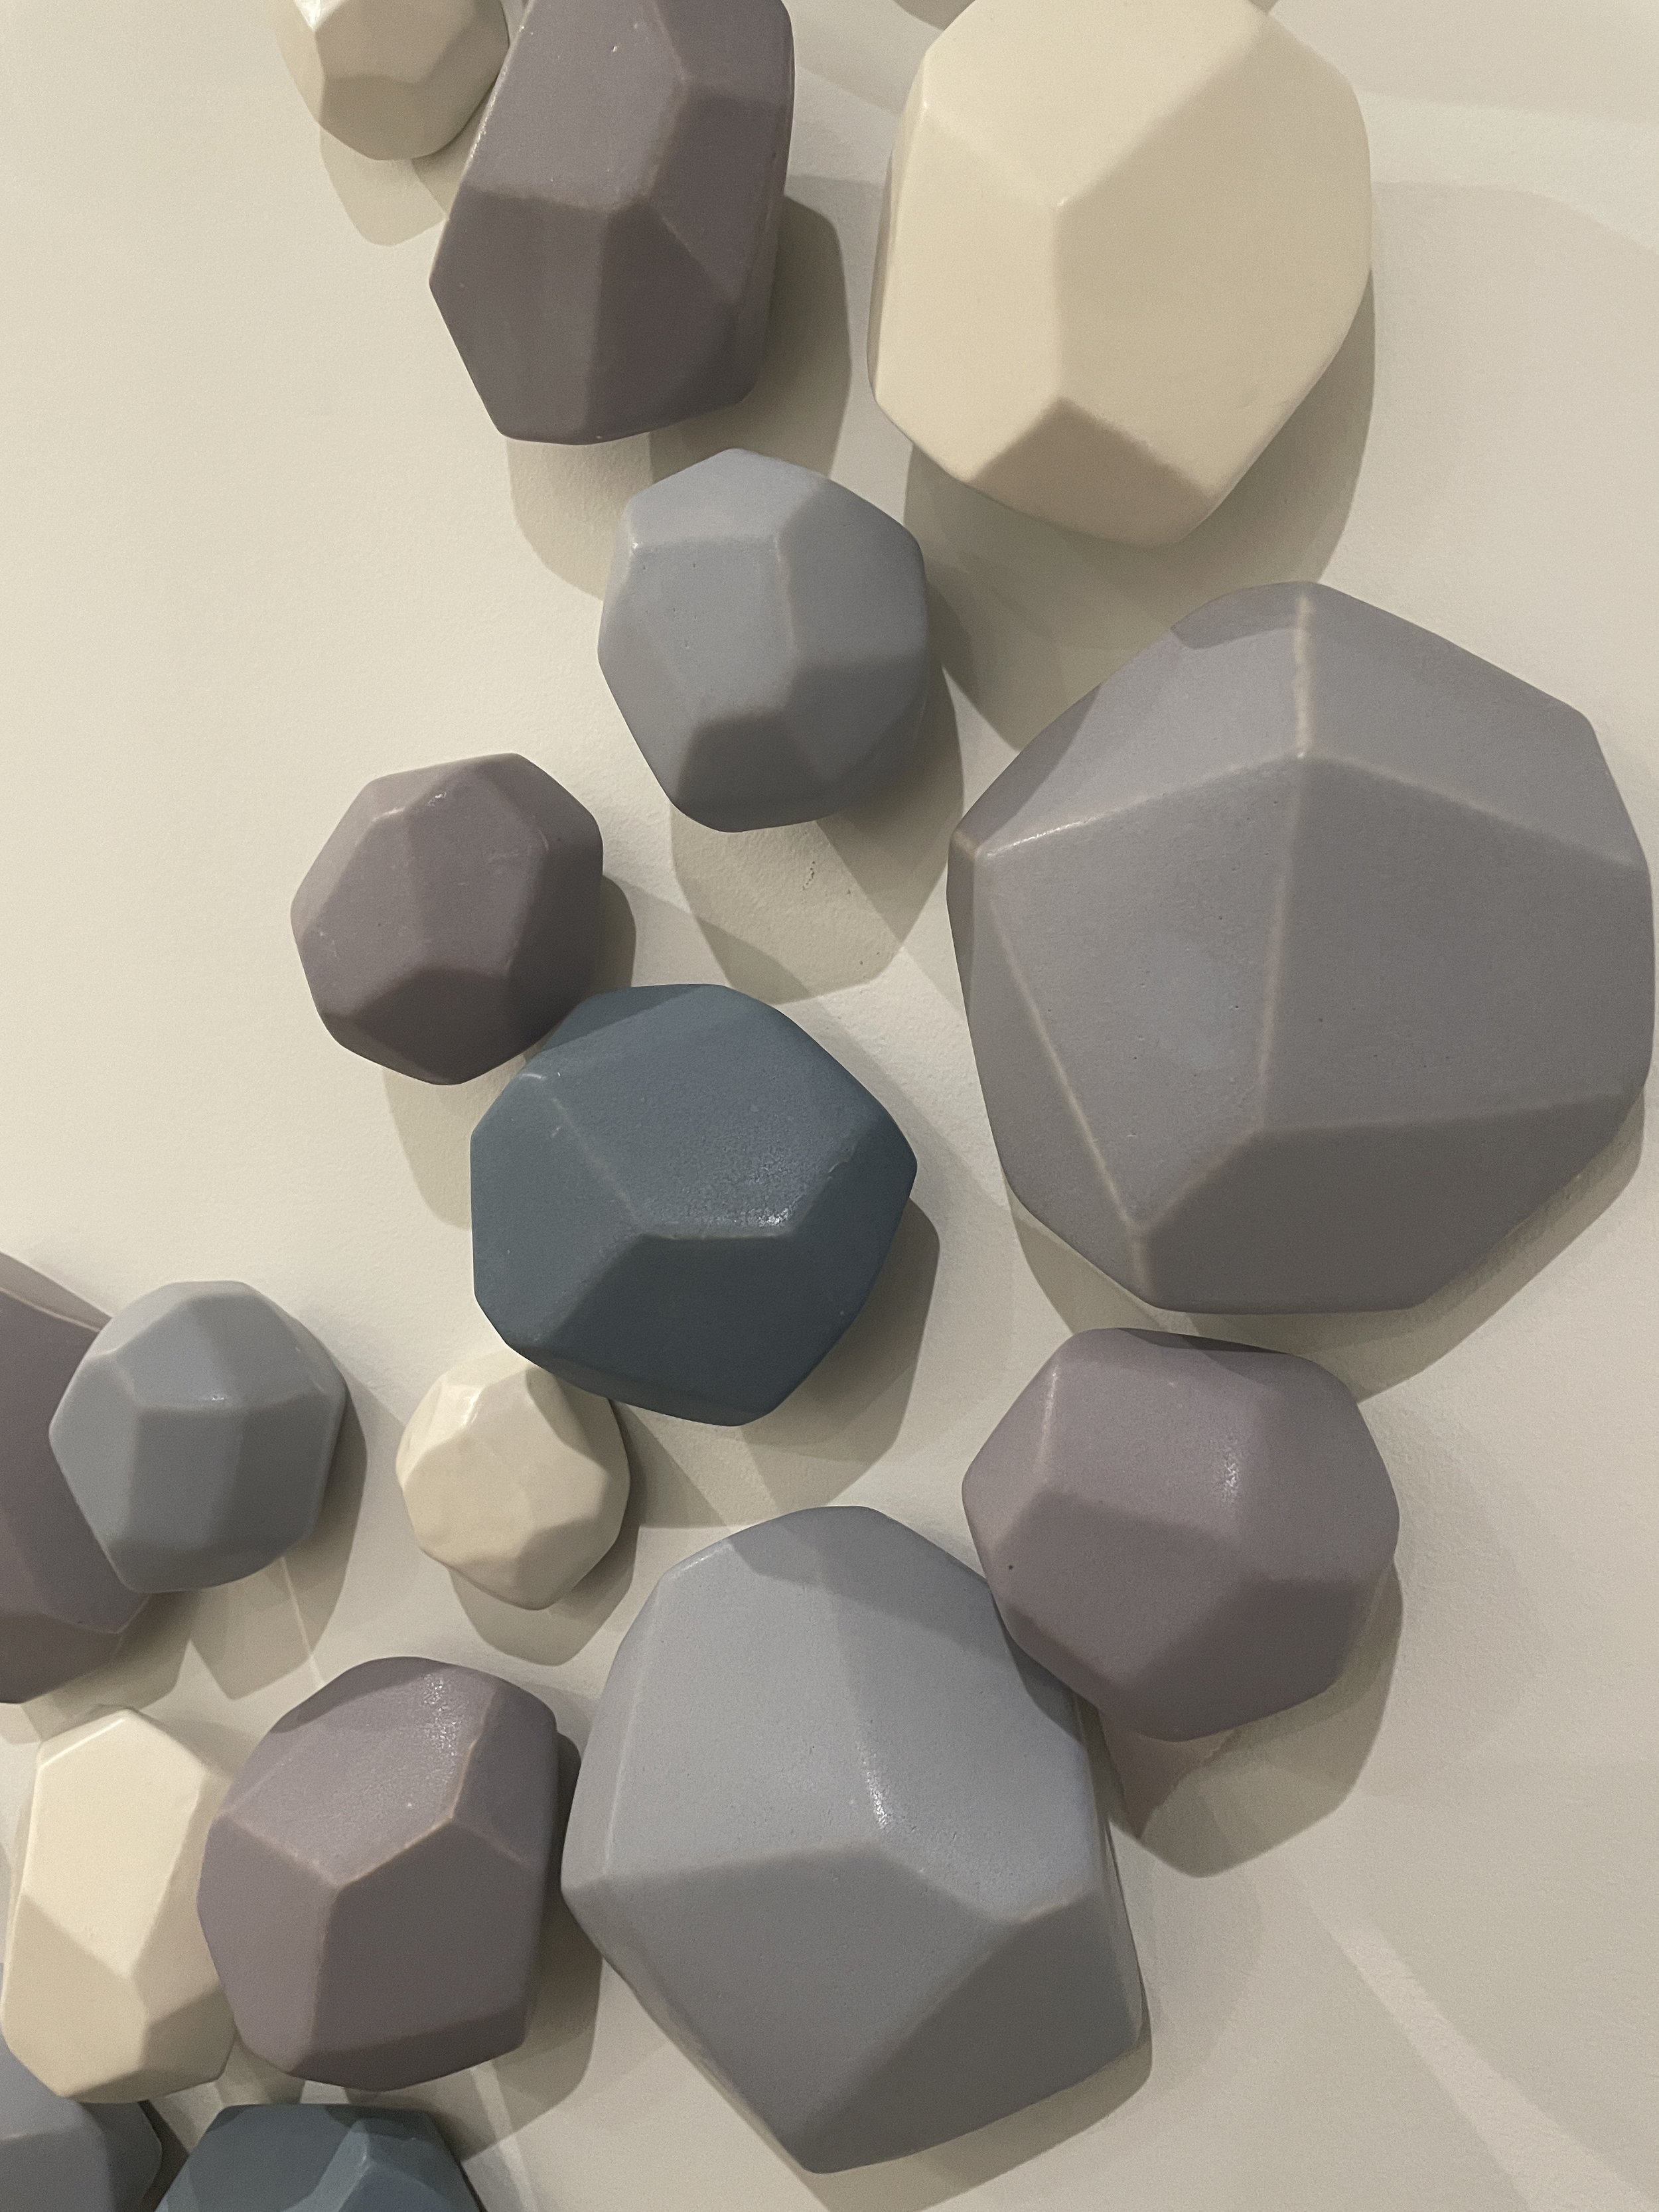  Rock sculpture with varying size asymmetrical rocks made by Lauren HB Studio 